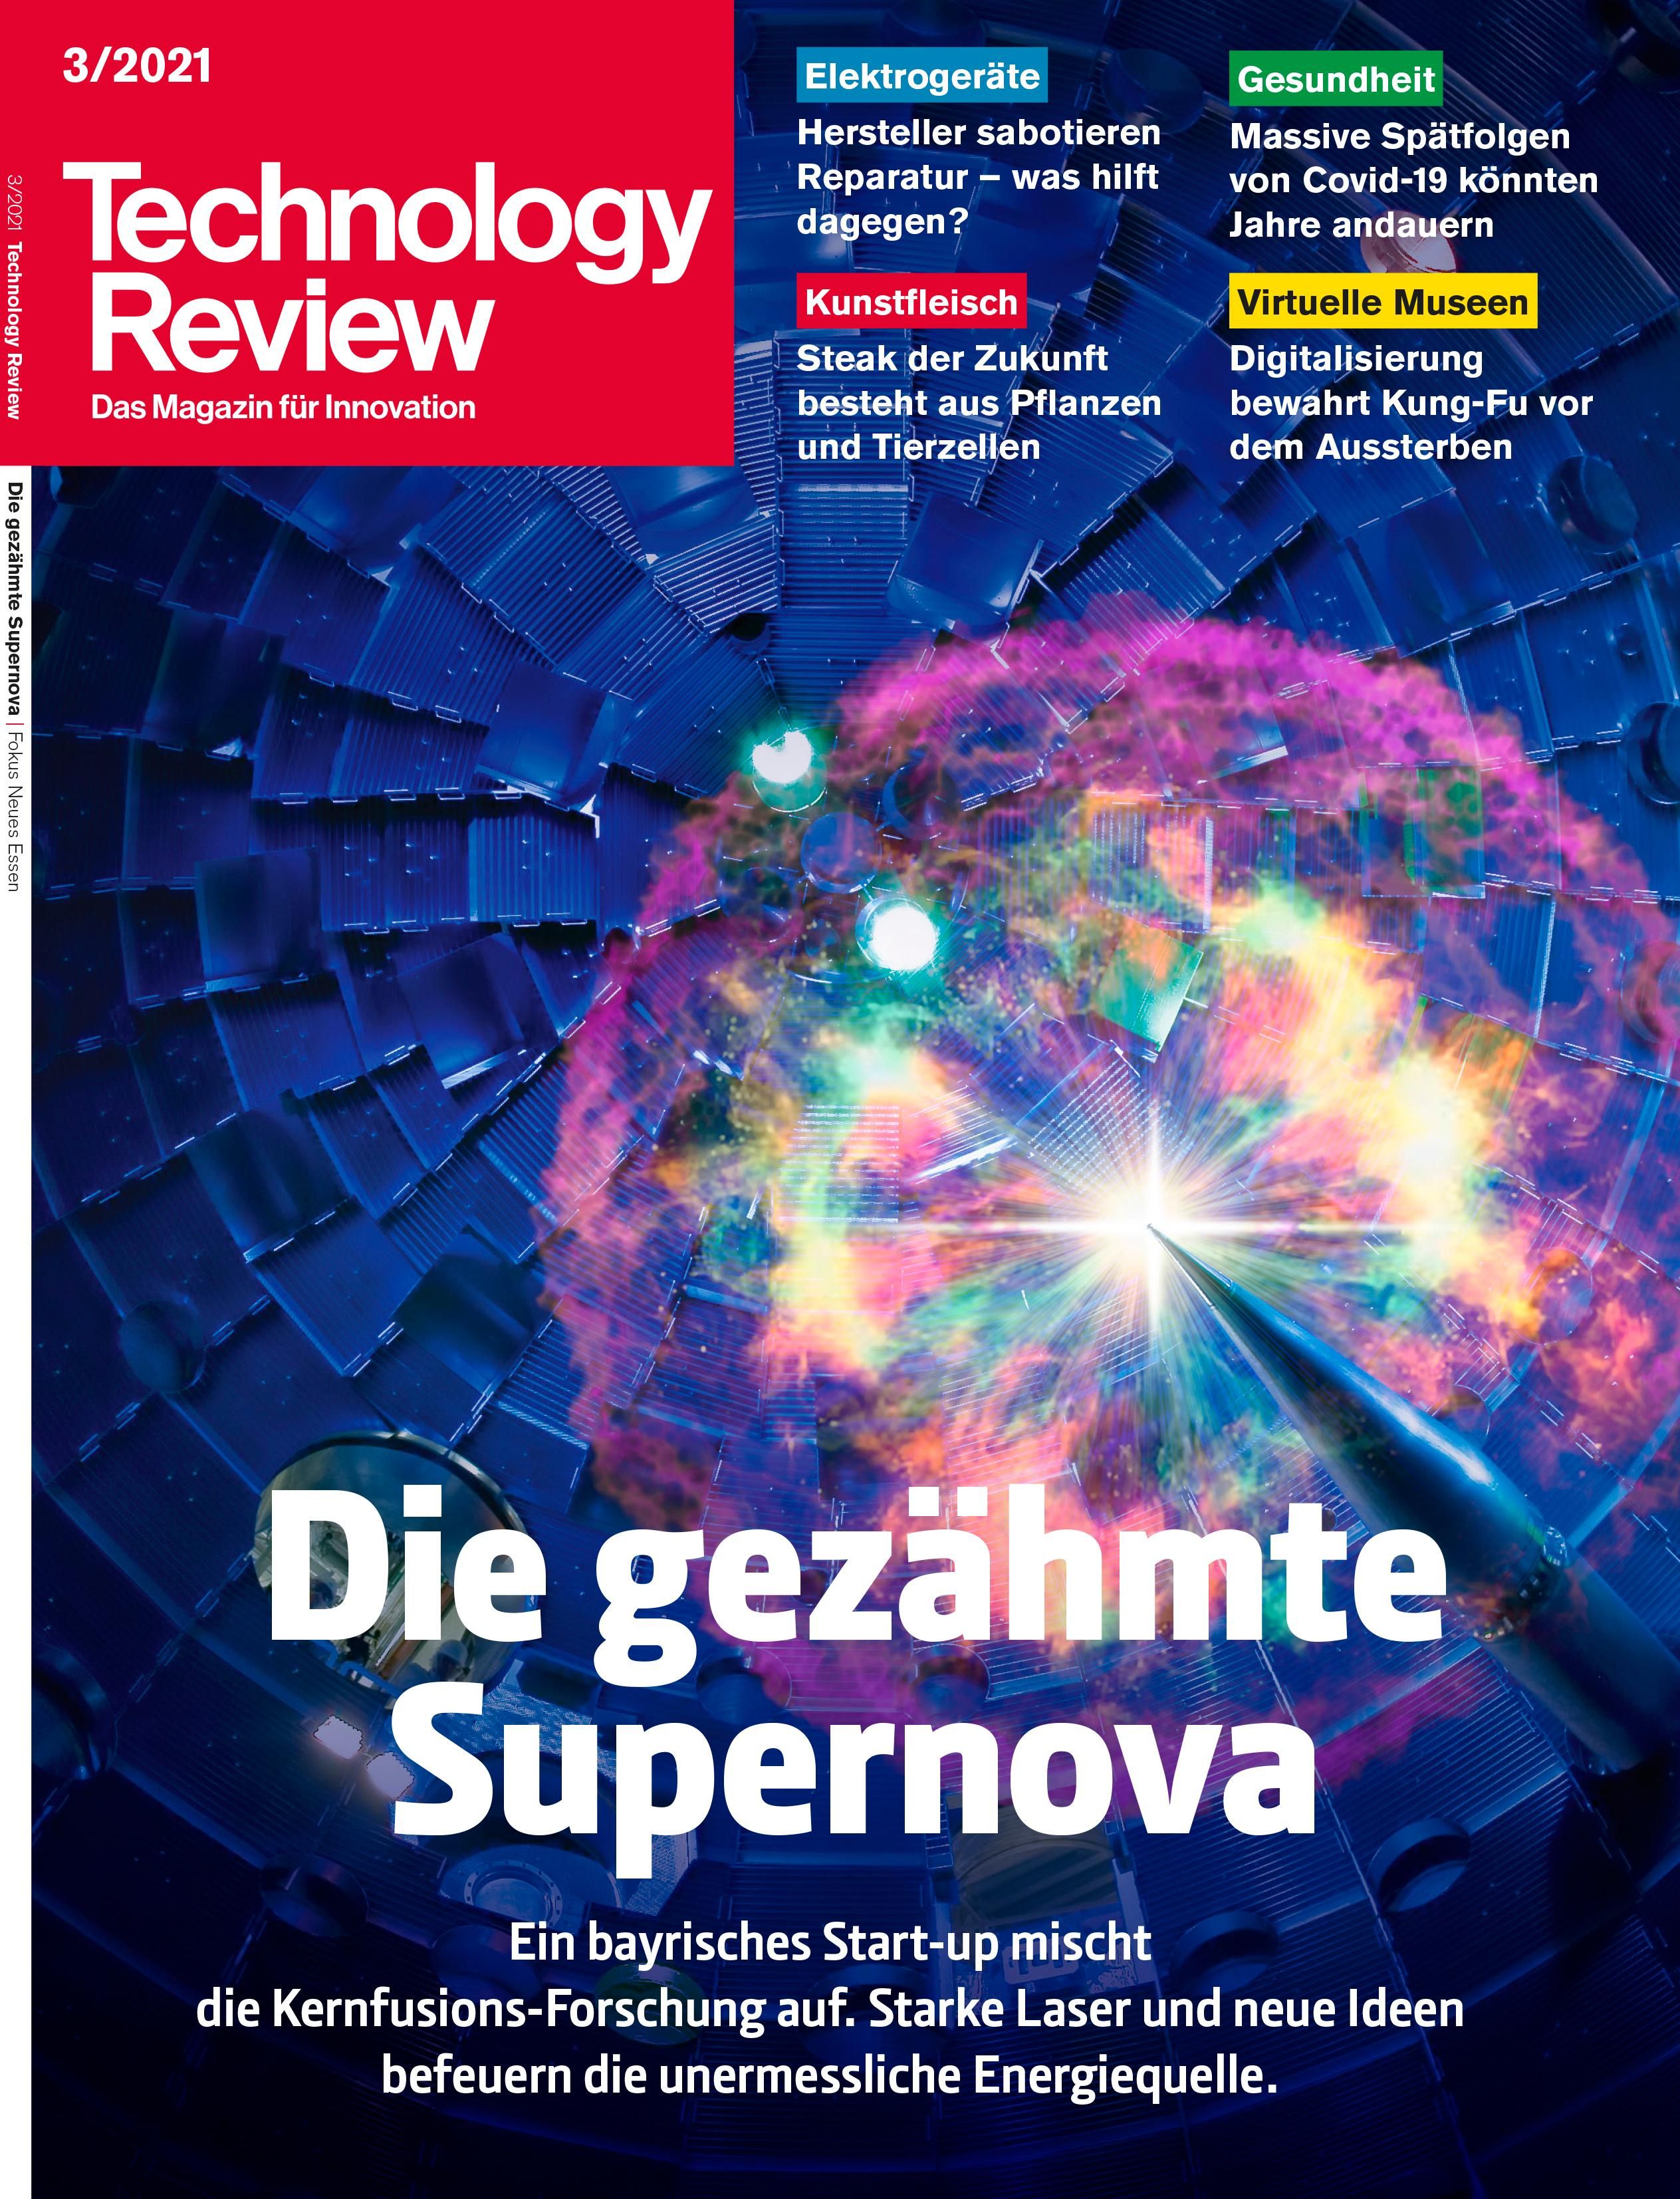 Technology Review 03/2021